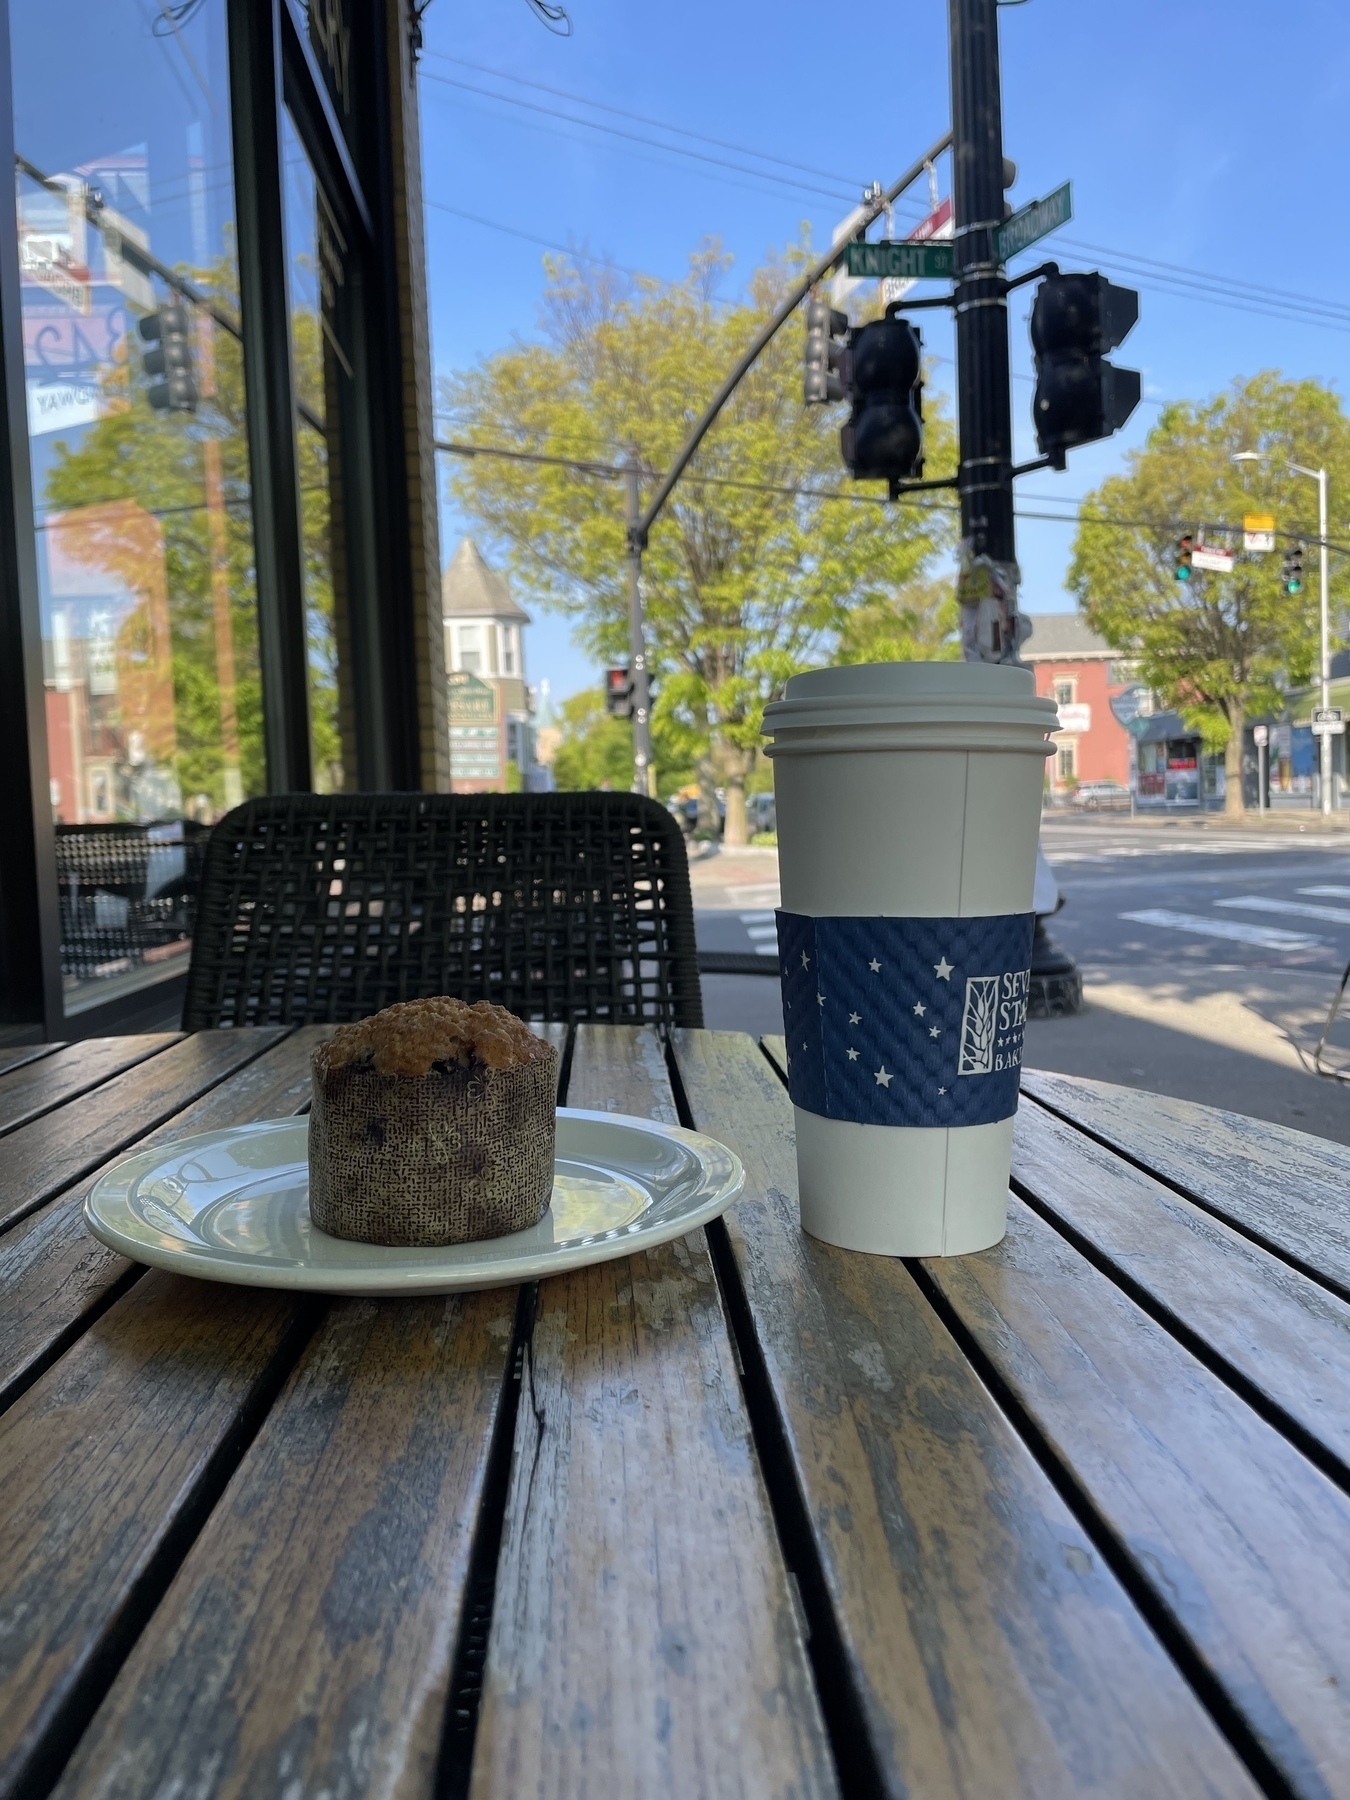 A berry muffin and a large paper to-go cup sit in a cafe table outside, in the shade. Behind it is another table, a street light pole, trees, houses and sky. 